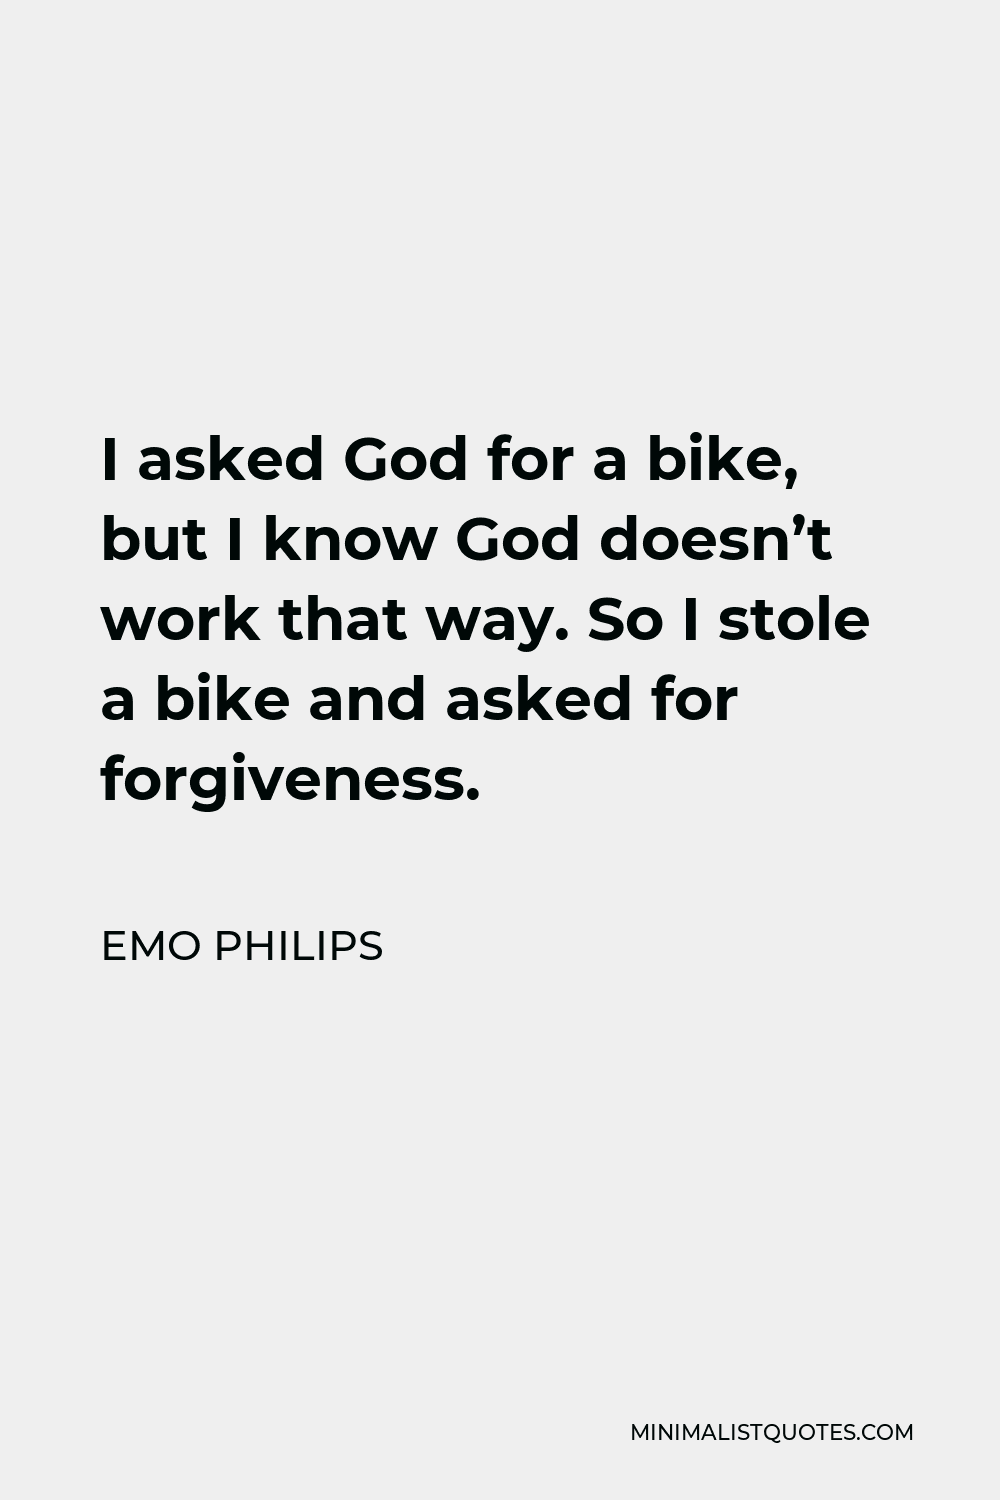 Emo Philips Quote - I asked God for a bike, but I know God doesn’t work that way. So I stole a bike and asked for forgiveness.